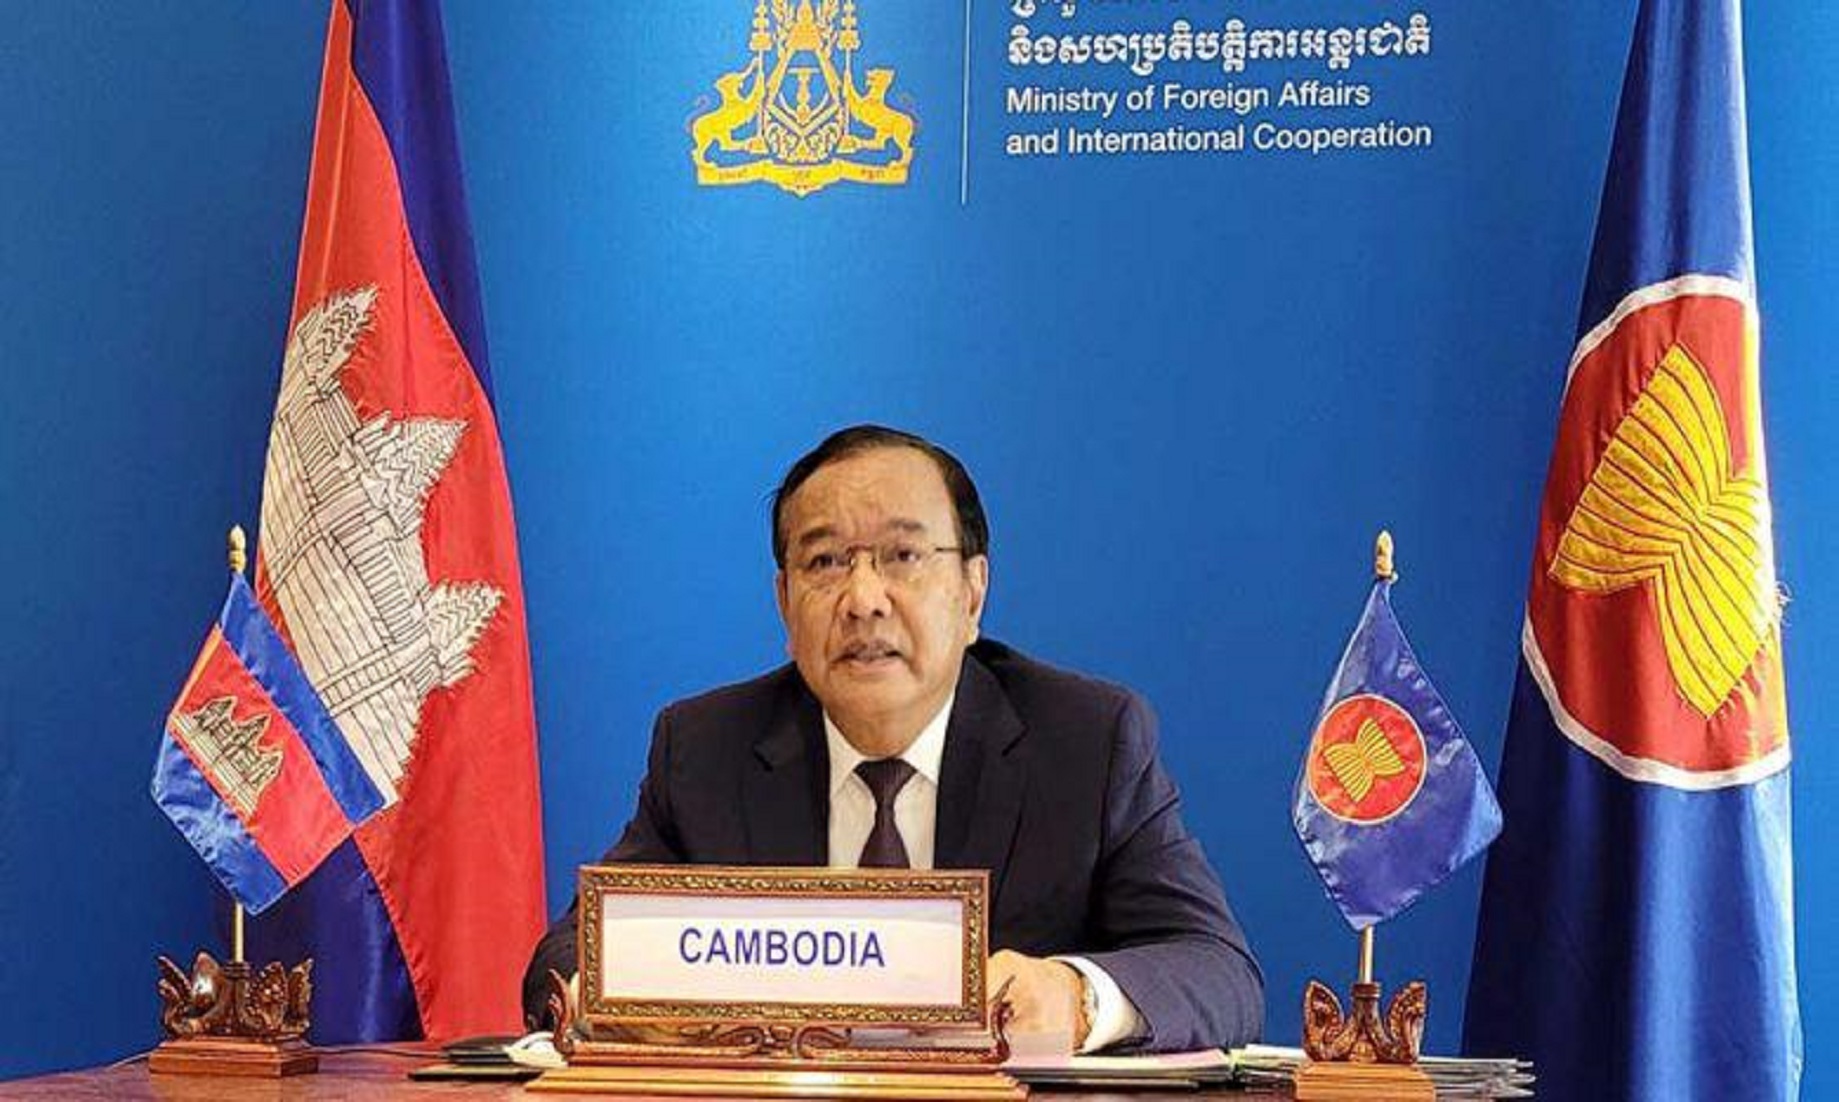 Cambodia Vows To Strengthen ASEAN’s Centrality For Regional Peace, Security, Prosperity